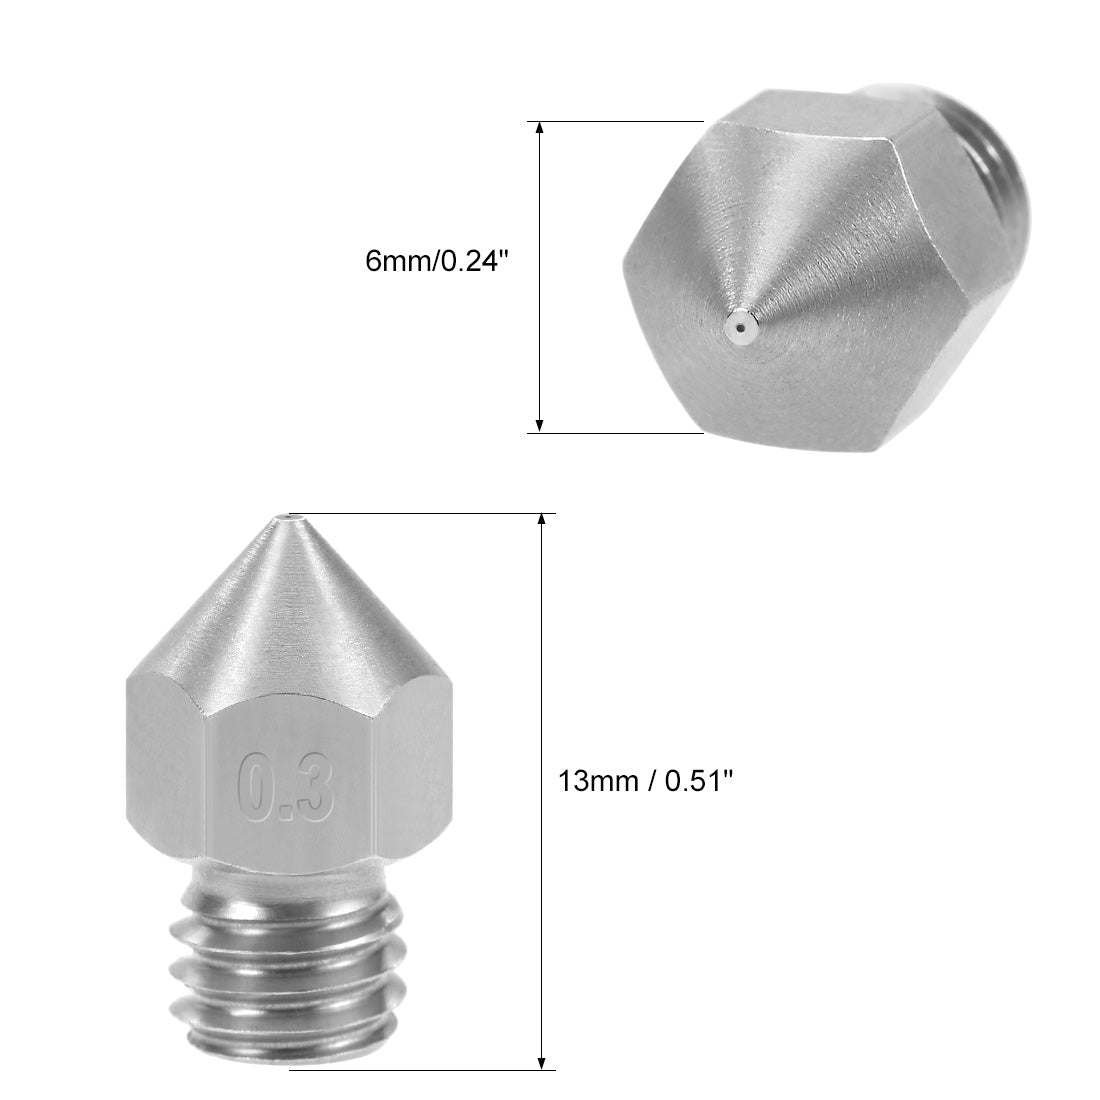 uxcell Uxcell 0.3mm 3D Printer Nozzle Head M6 for MK8 1.75mm, Stainless Steel 5pcs